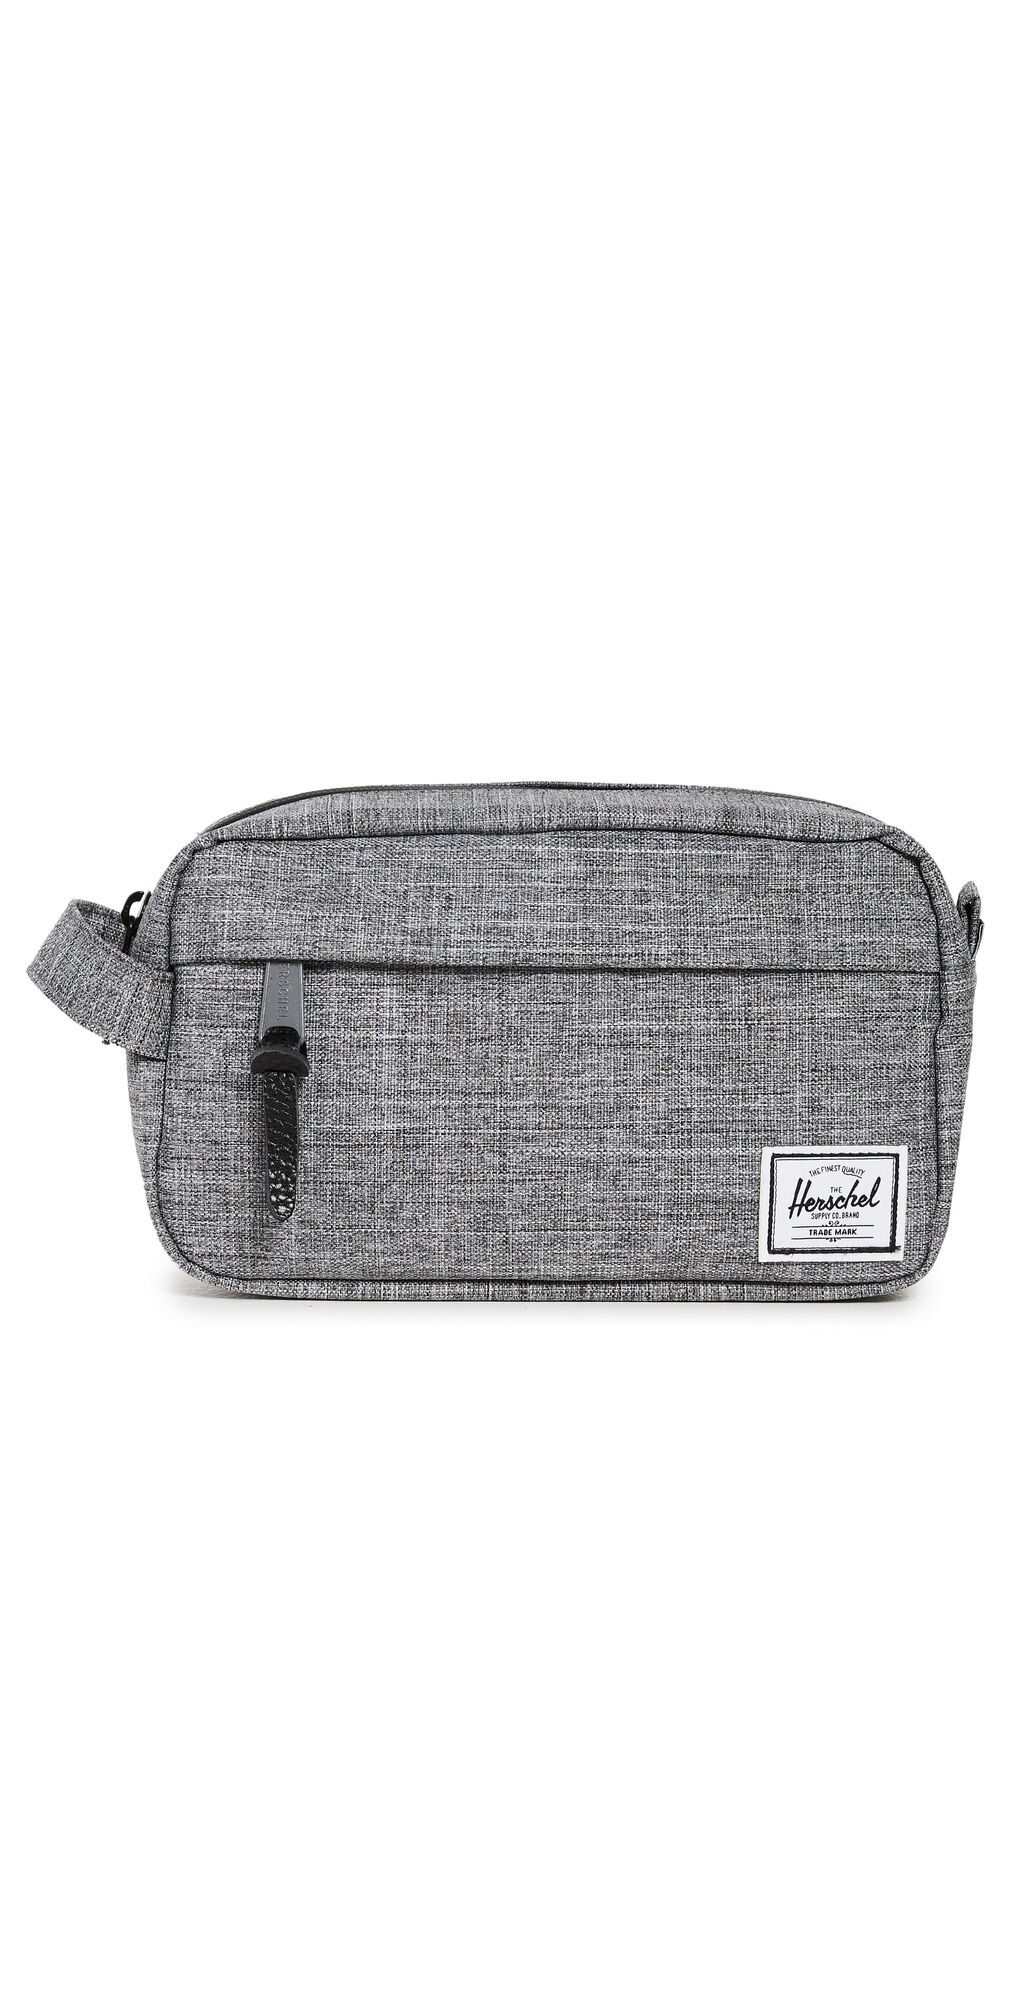 Herschel Supply Co. Chapter Carry On Travel Kit Raven Crosshatch One Size  Raven Crosshatch  size:One Size